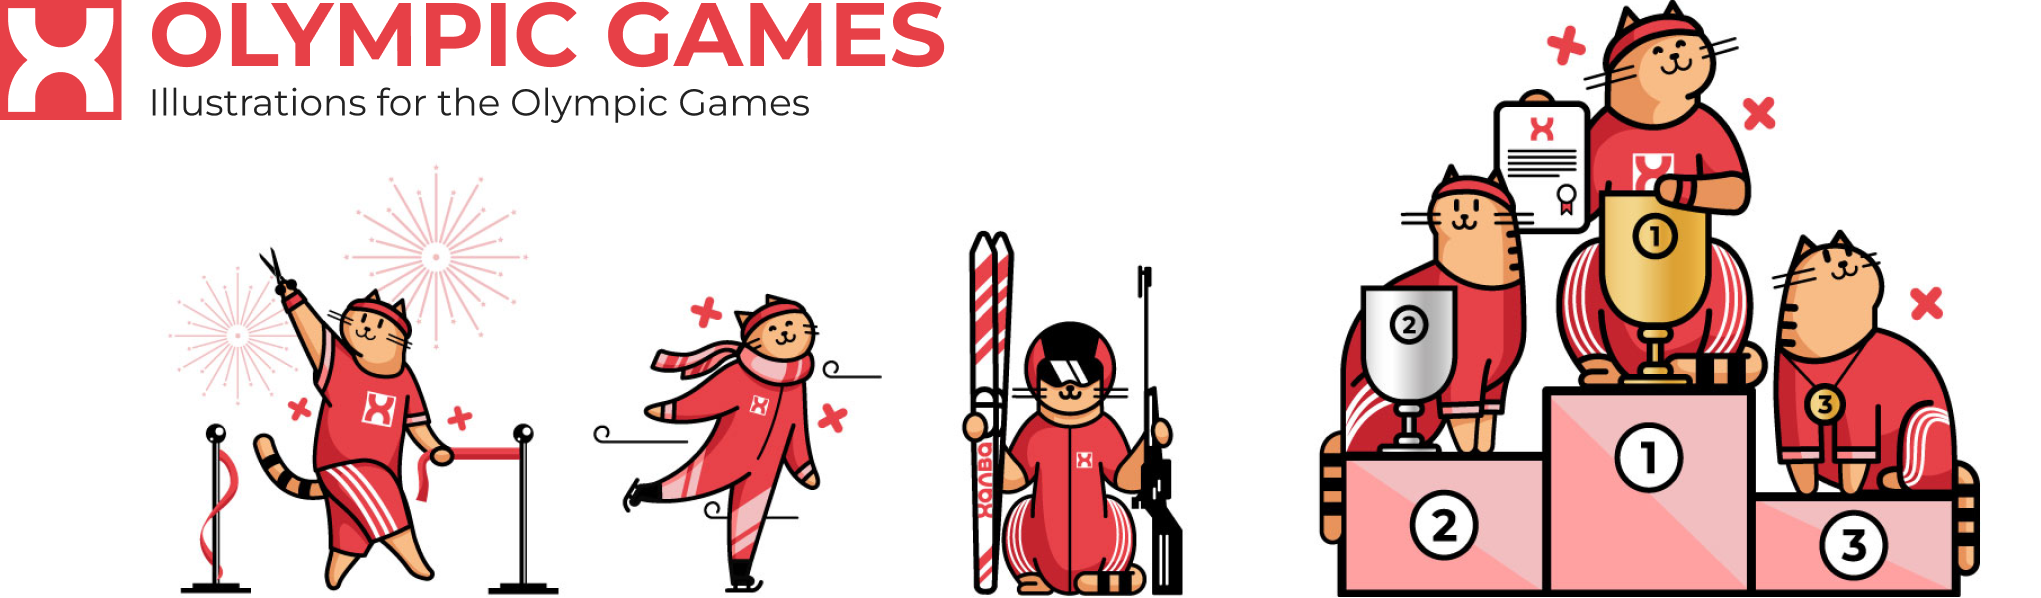 Olympic Games: Illustrations on the theme of the Olympic Games